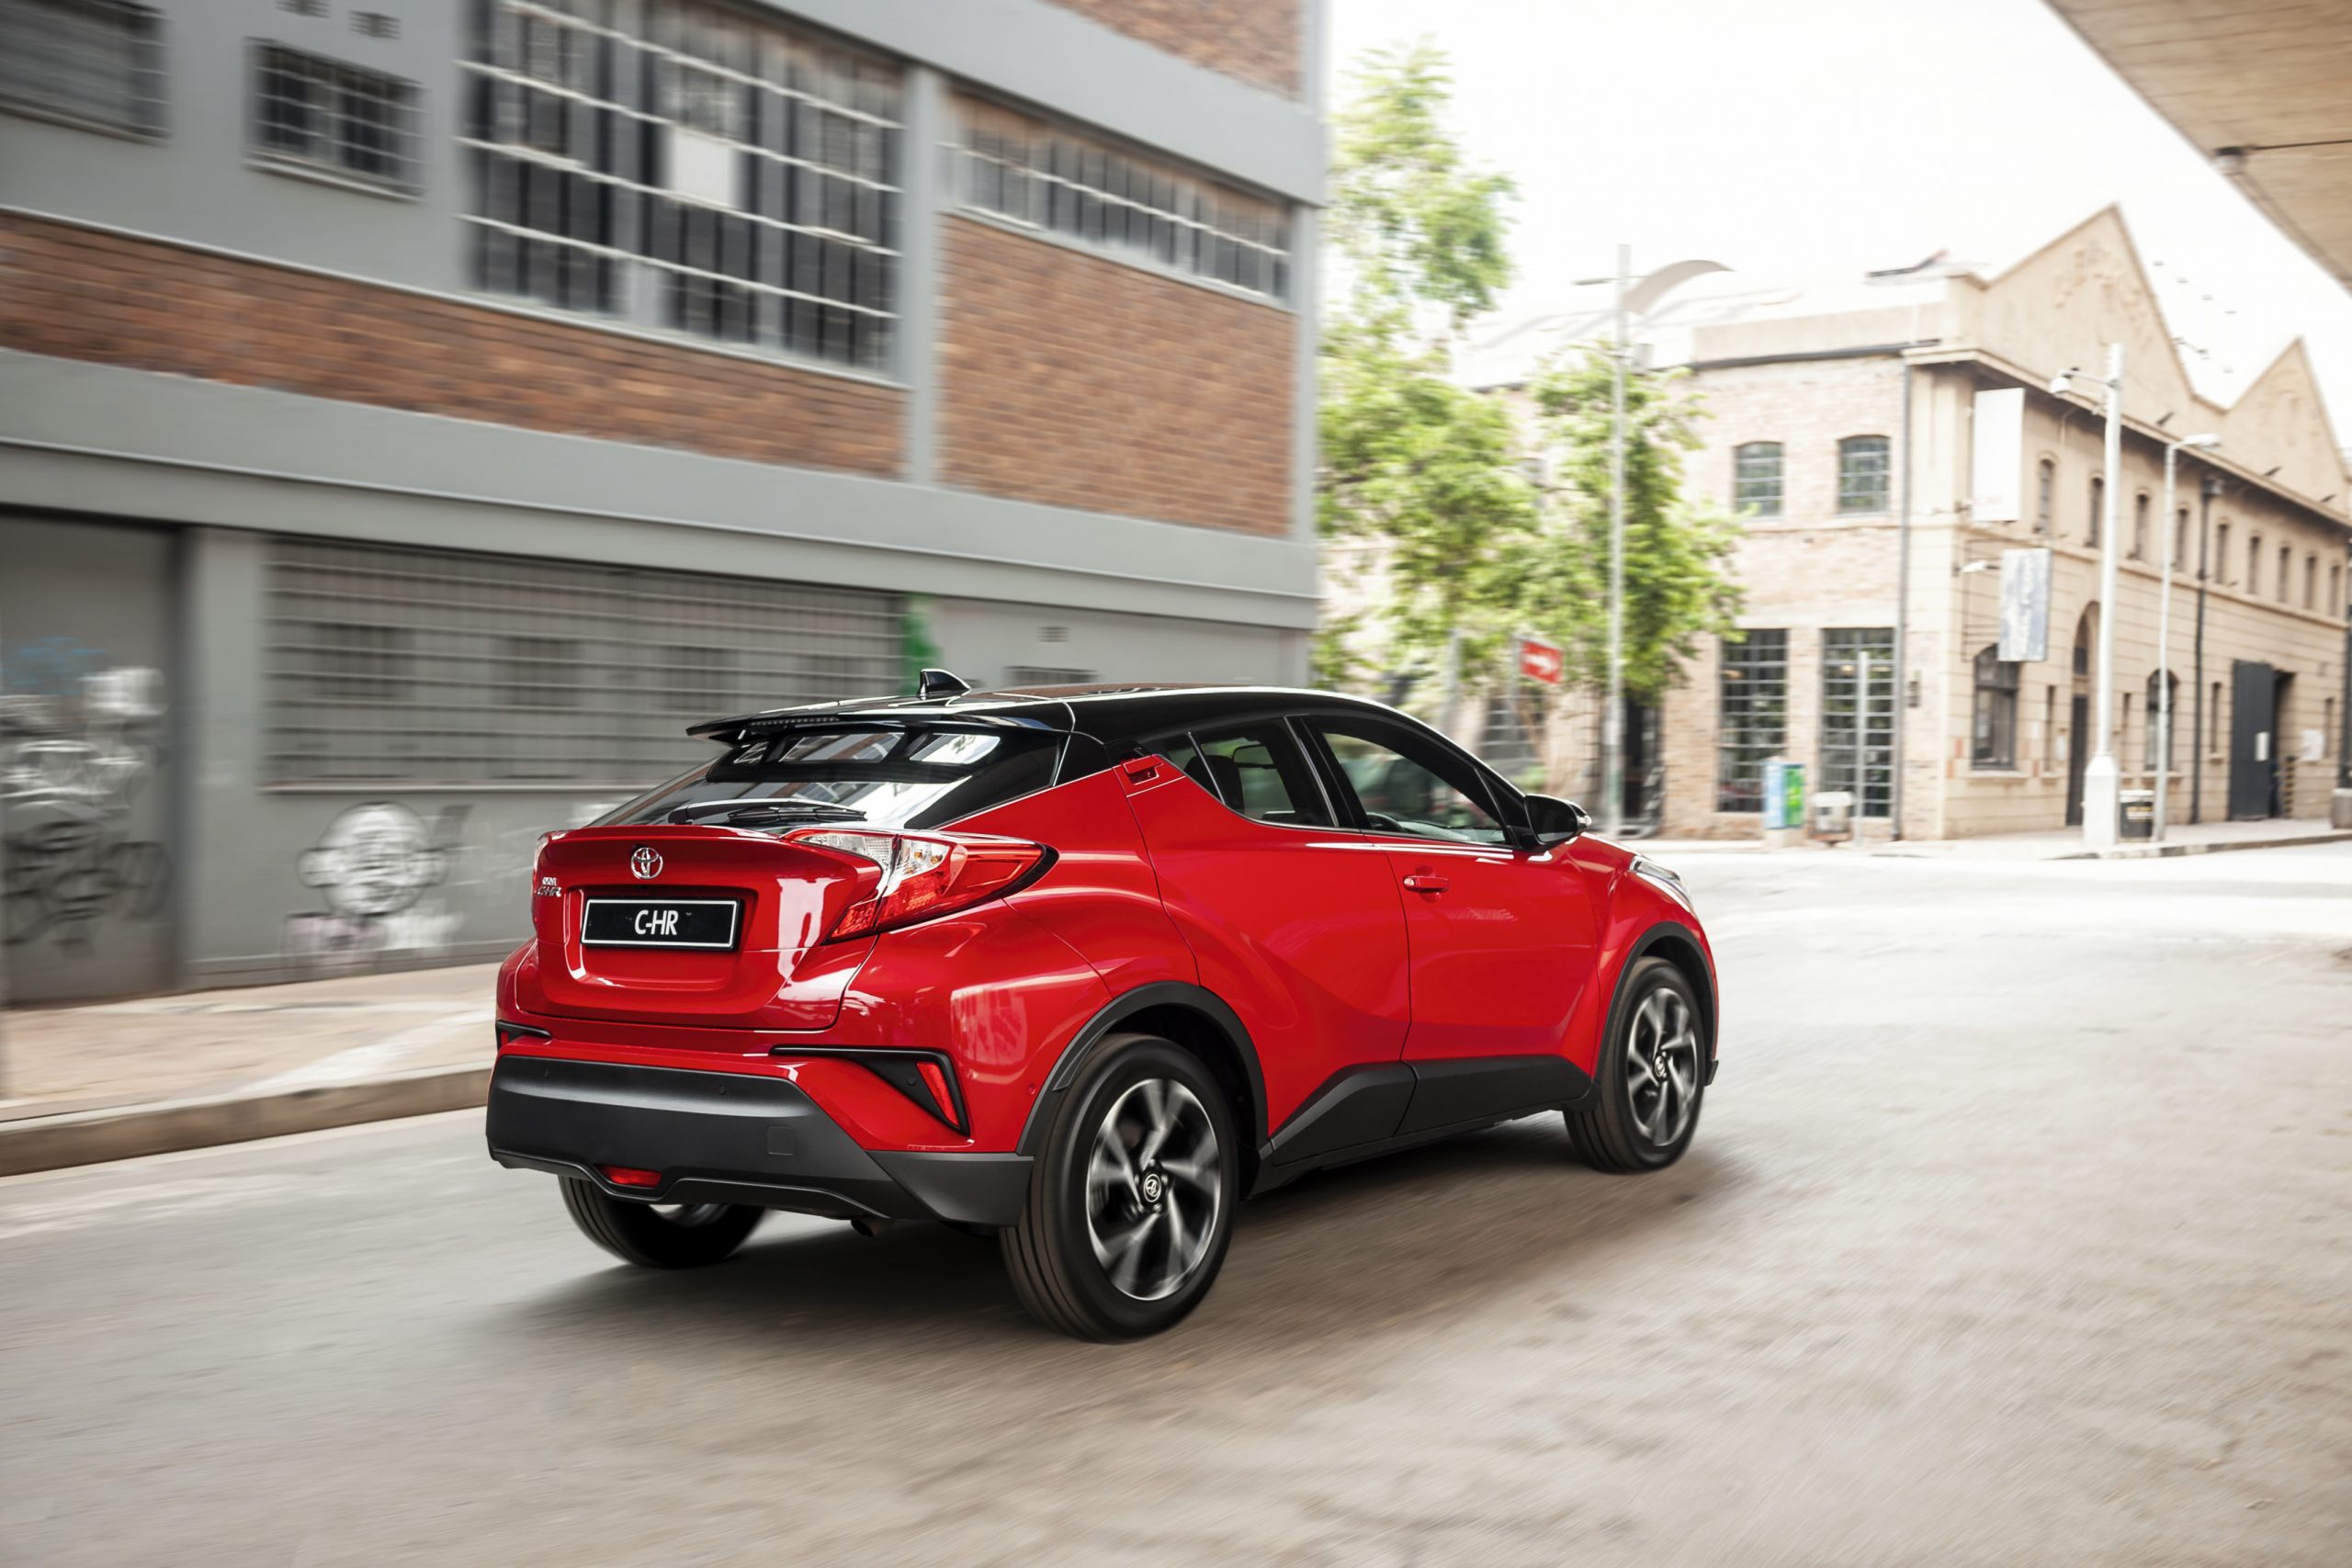 Toyota C-HR | crossover | compact | coupe high rider